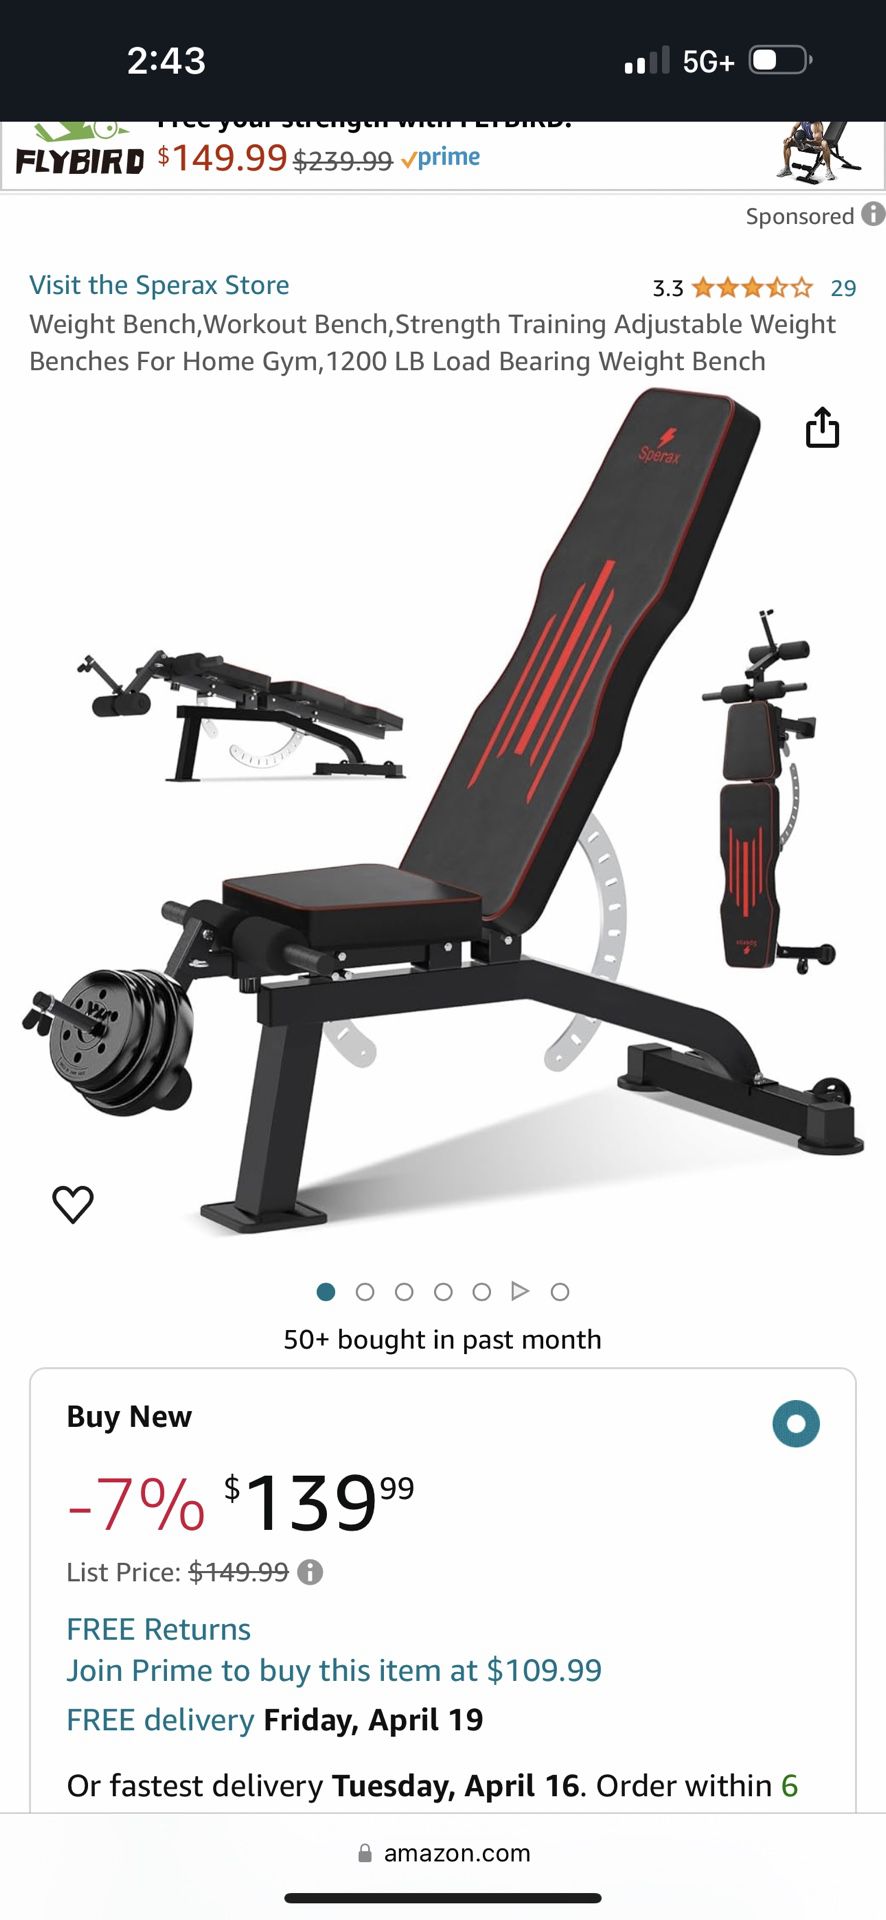 New Weight Bench Workout Gym 1200 Libras Load $80